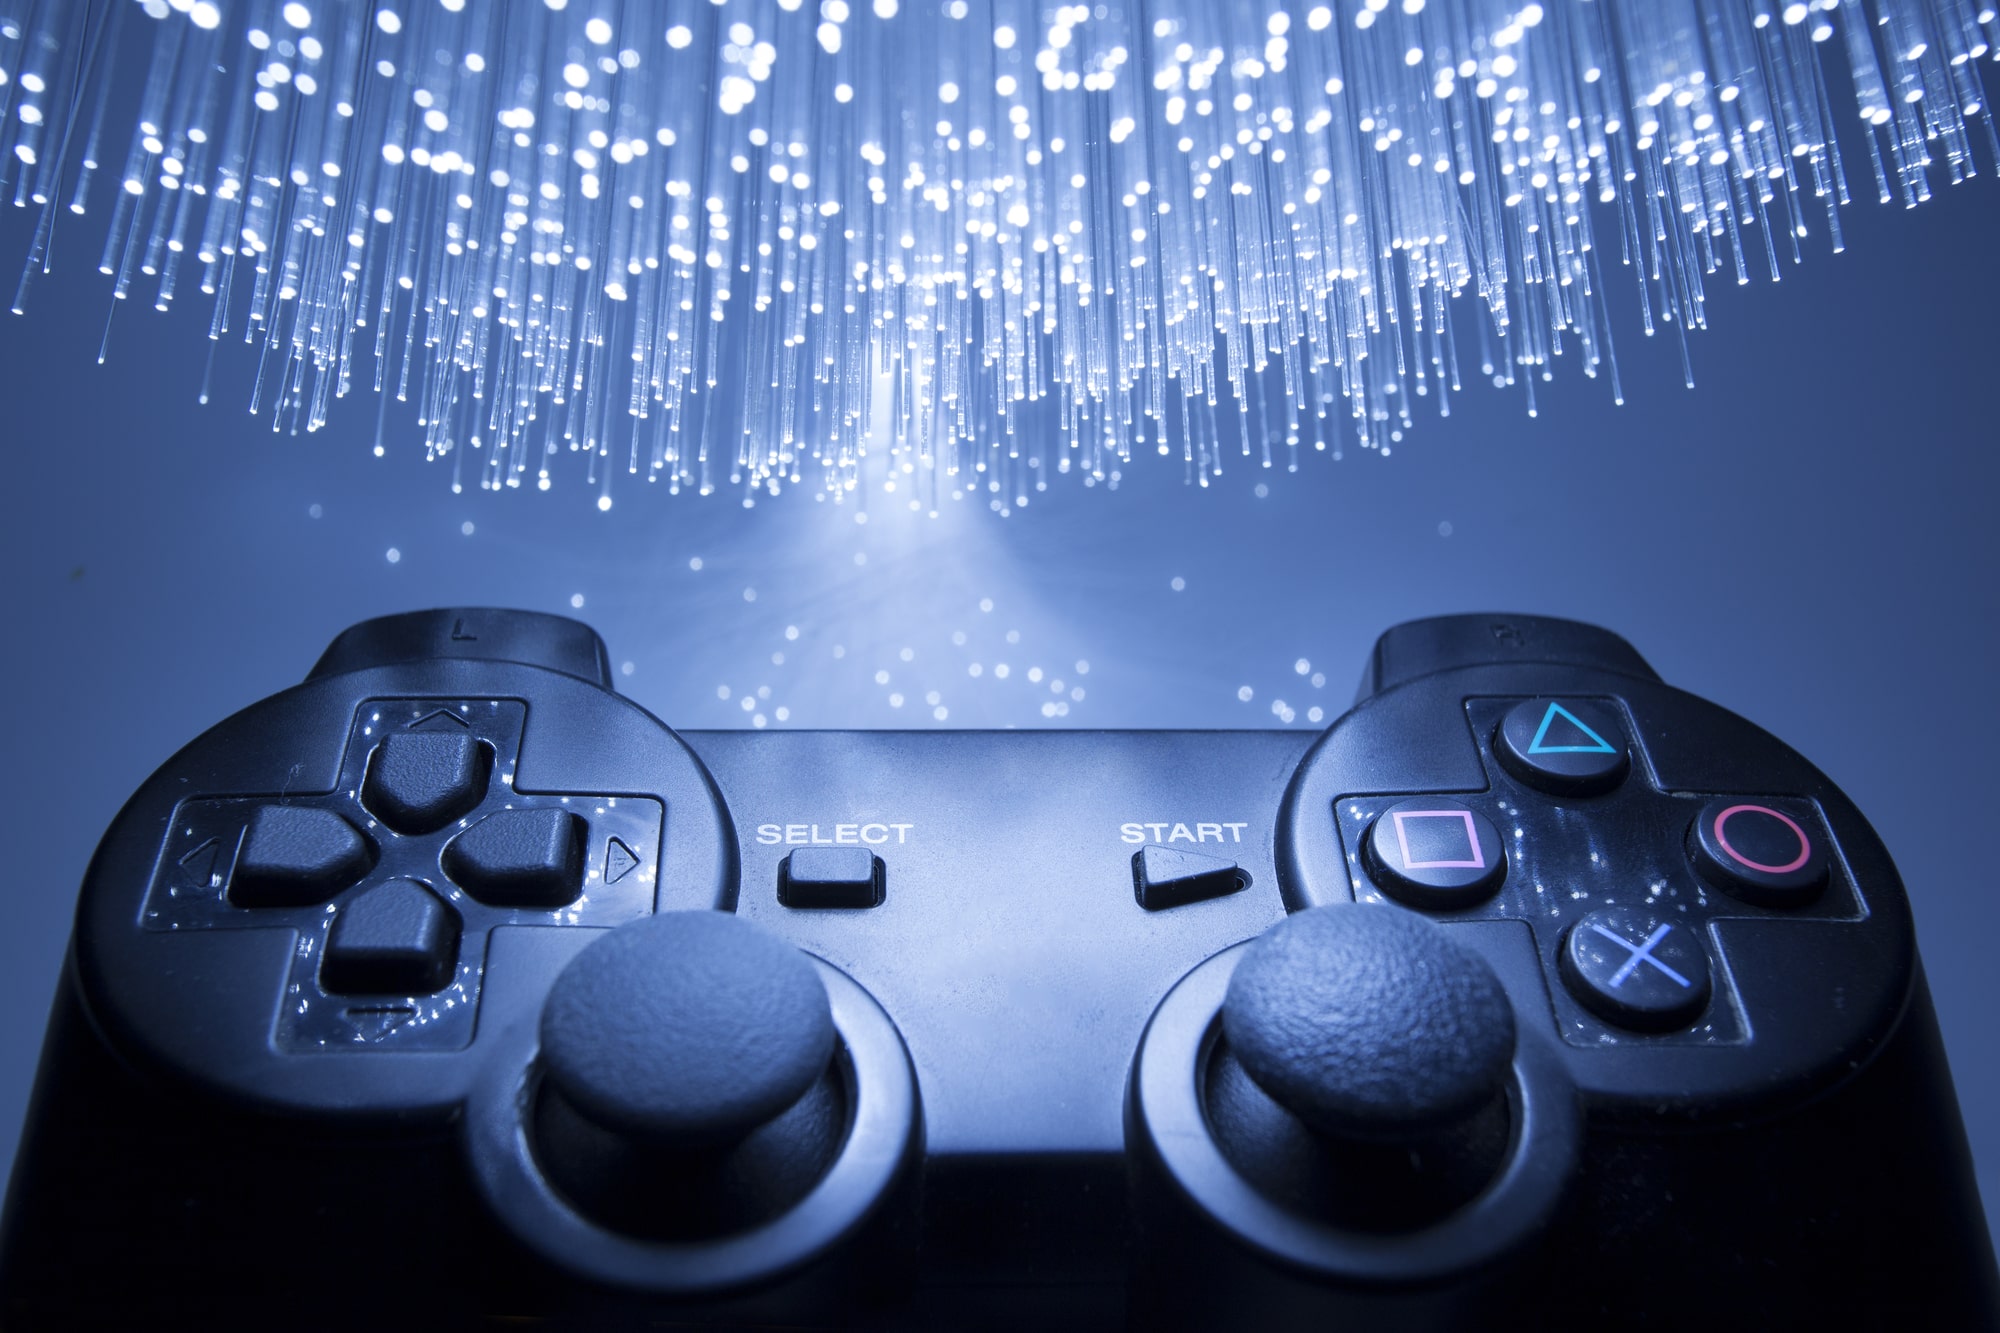 NFTs aid to possess digital property rights in the game industry